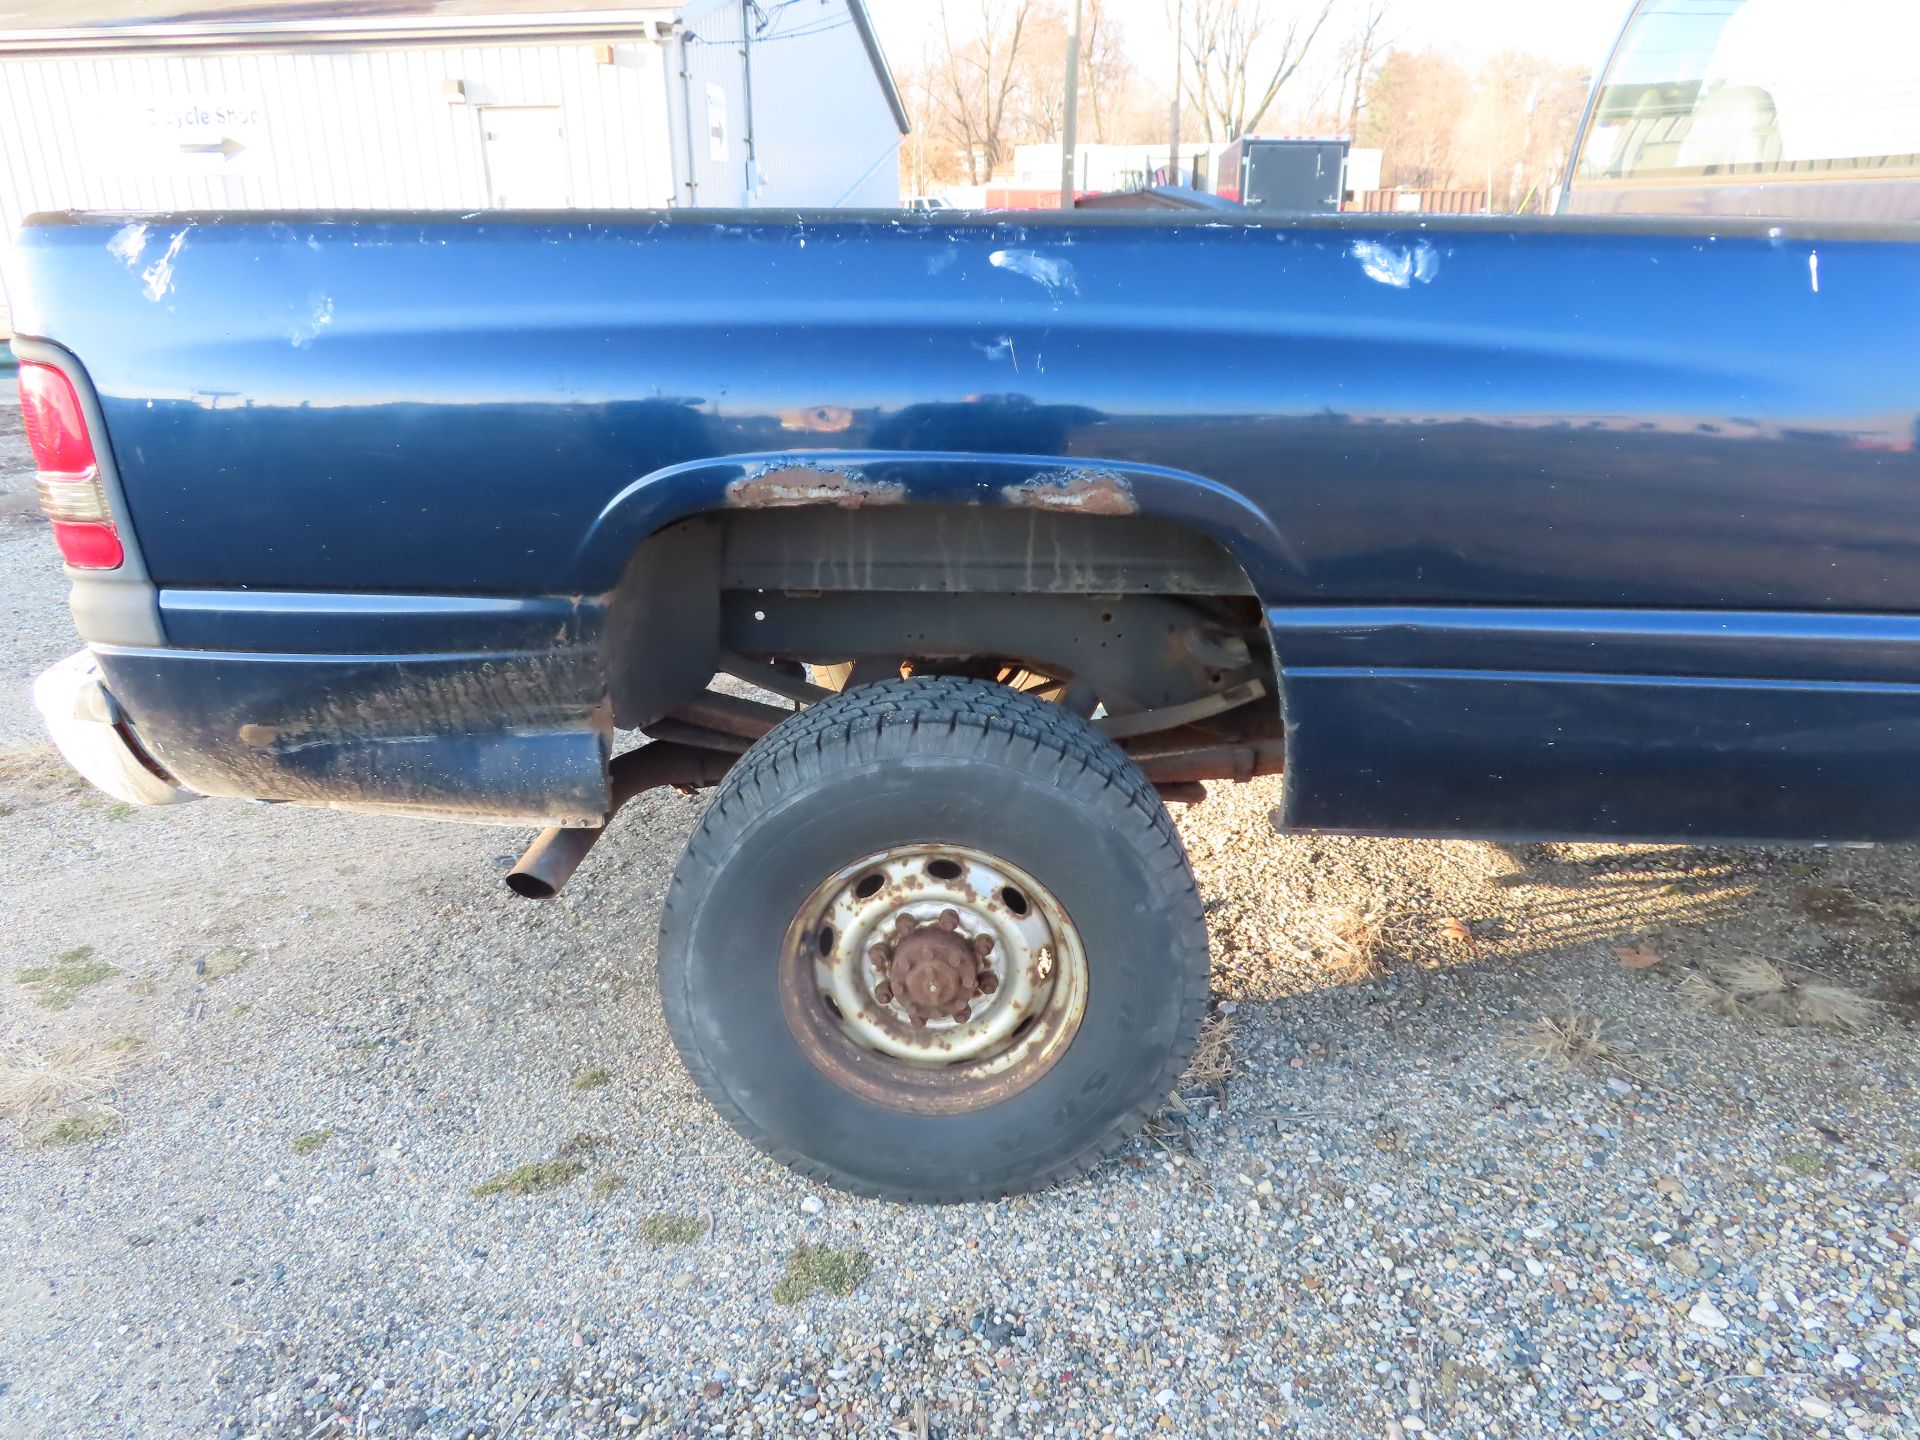 2002 Dodge Ram 2500 plow truck VIN 3B7KF26Z32M309373, 4wd, includes western plow with ultra-mount - Image 7 of 18